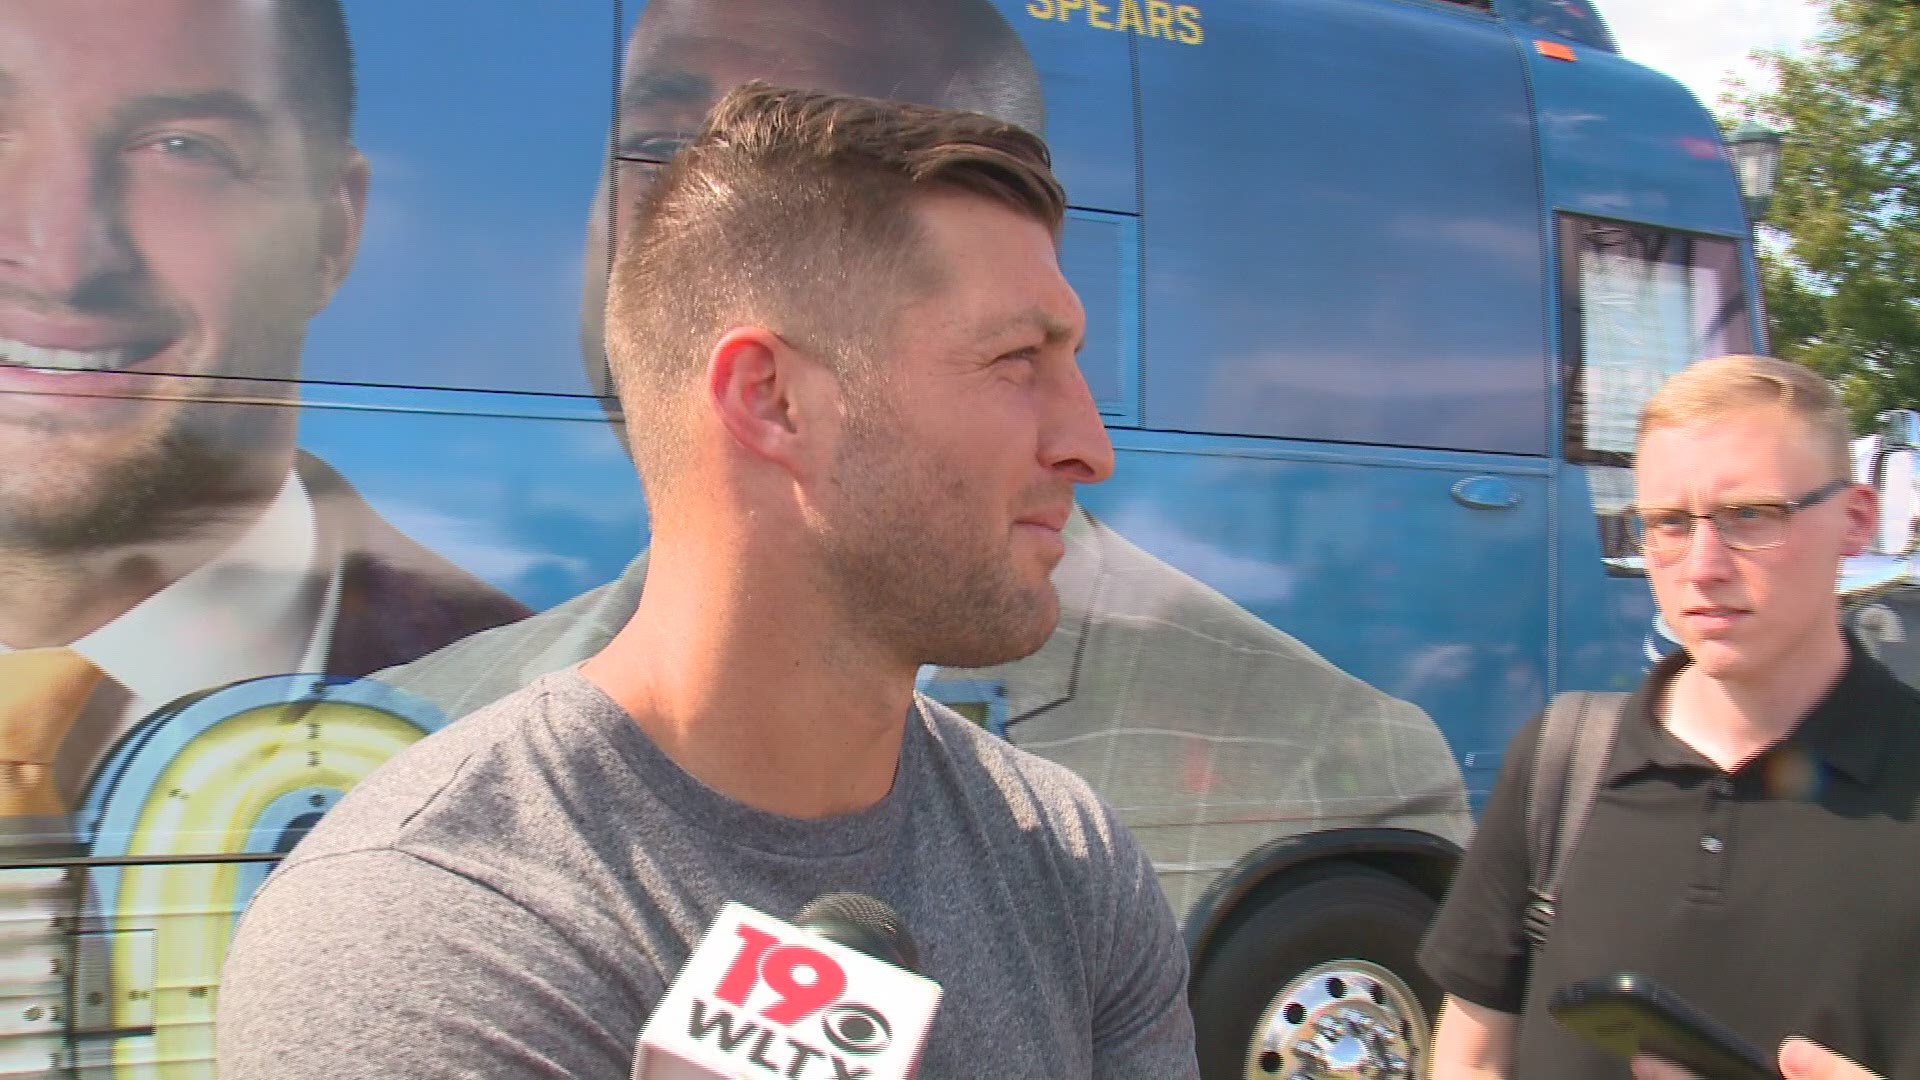 SEC Network analyst Tim Tebow met the media to talk about Saturday's game between 24th-ranked USC and third-ranked Georgia.